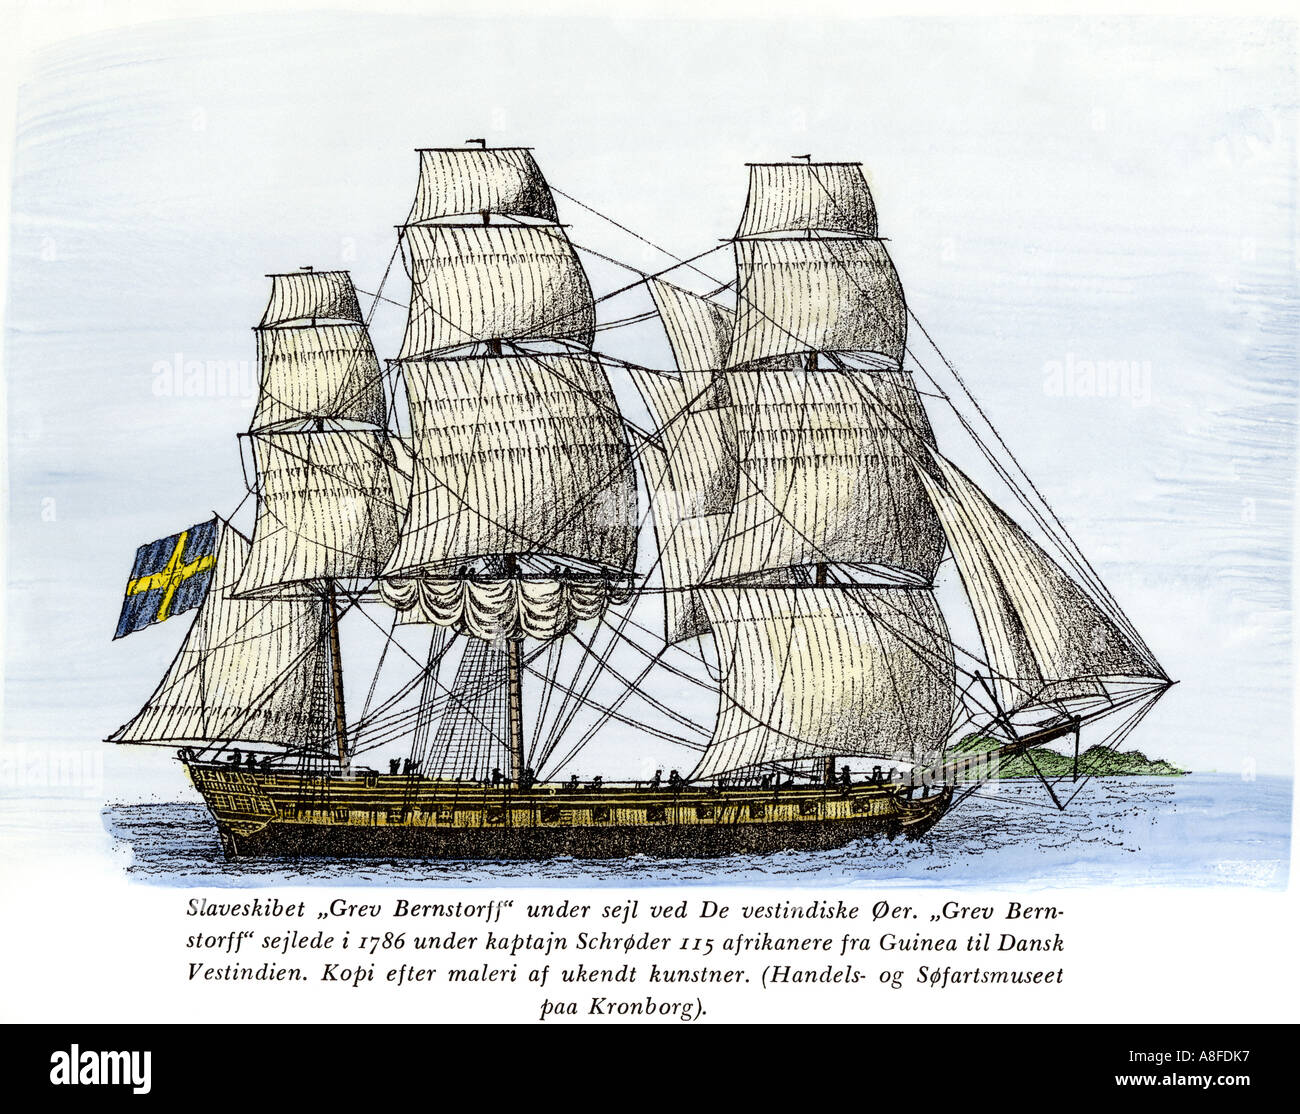 Scandinavian slave ship Grev Bernstorff under sail for the West Indies from Africa 1786. Hand-colored woodcut Stock Photo